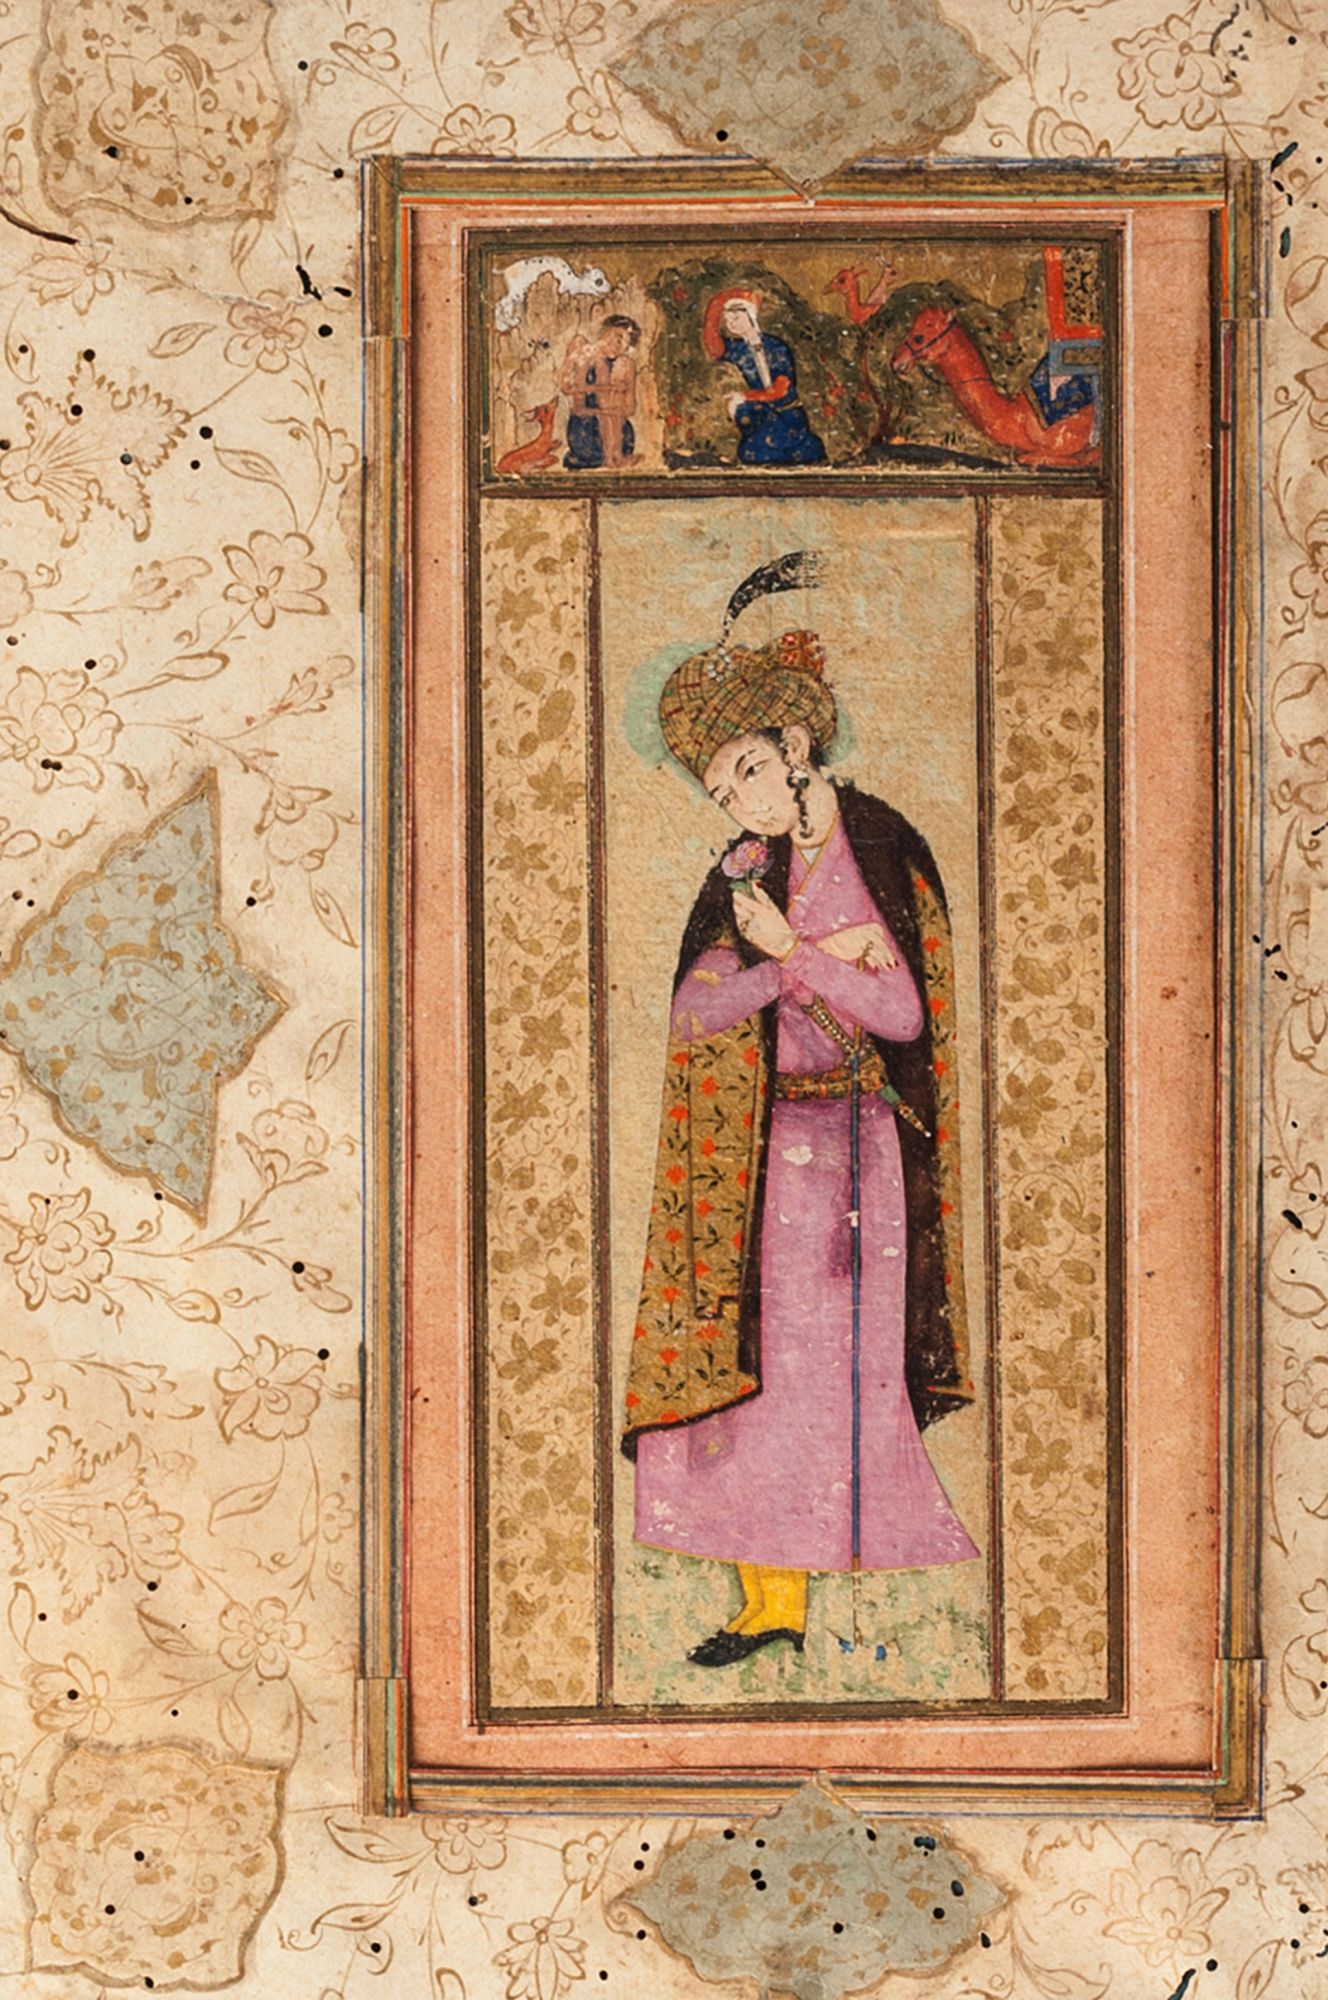 A Safavid portrait of Shah Abbas (1571-1629) as a young man, Iran, c. 1590, with a scene from